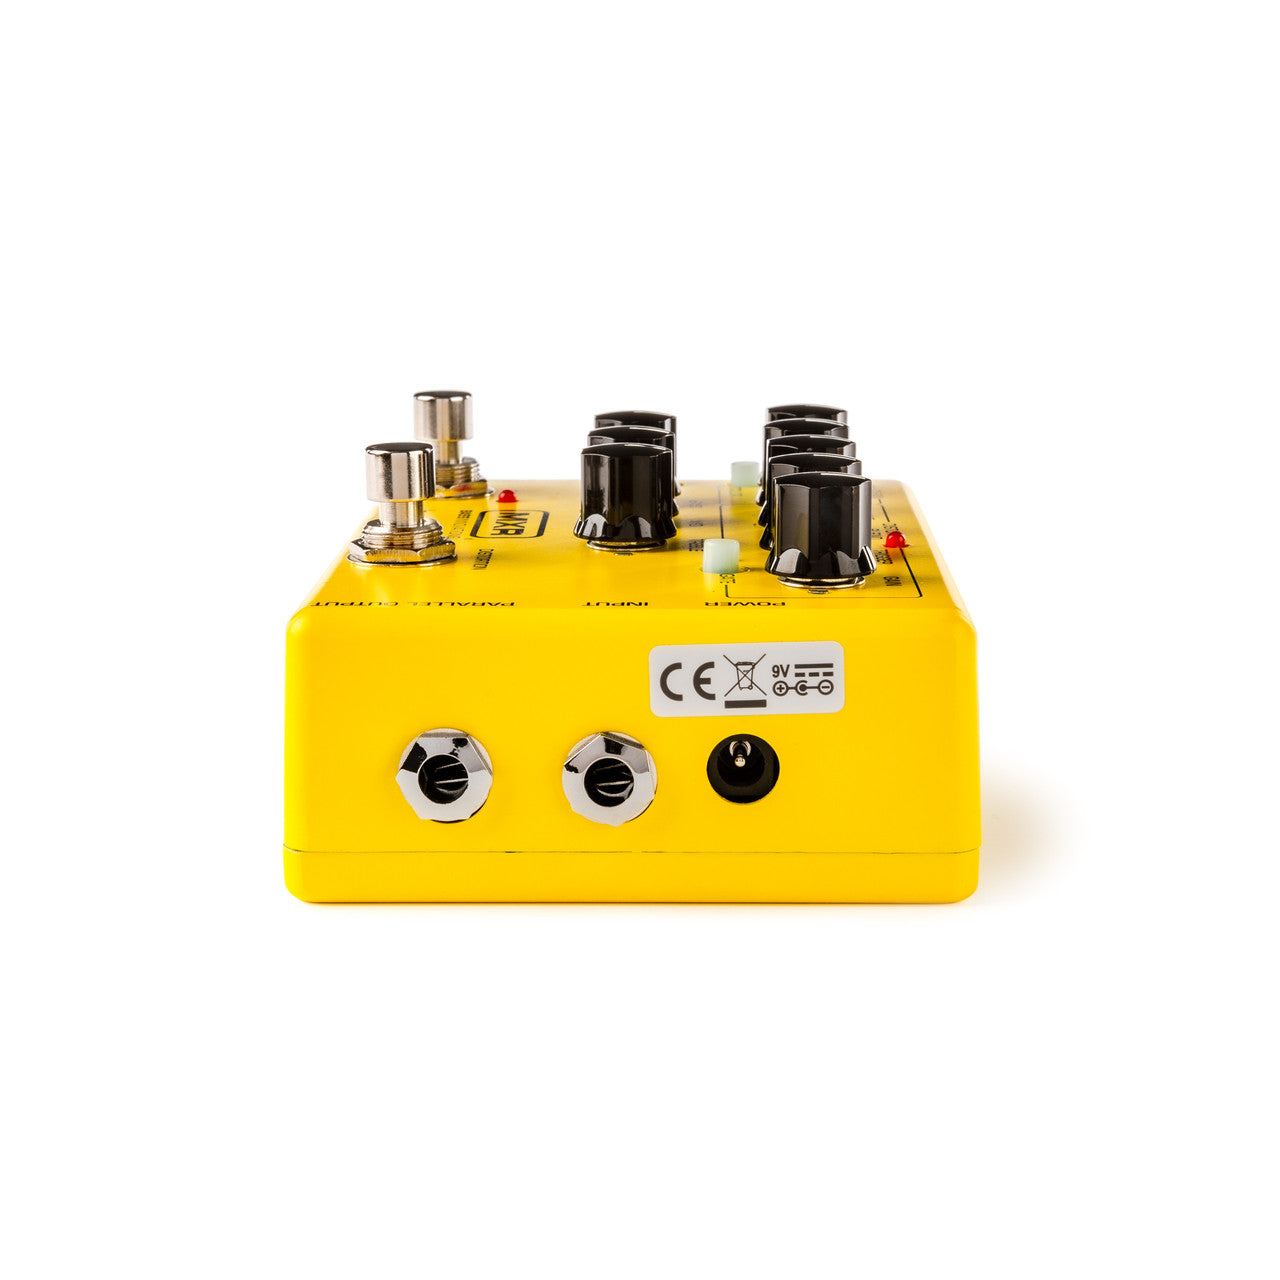 MXR Bass DI+ Special Edition Yellow